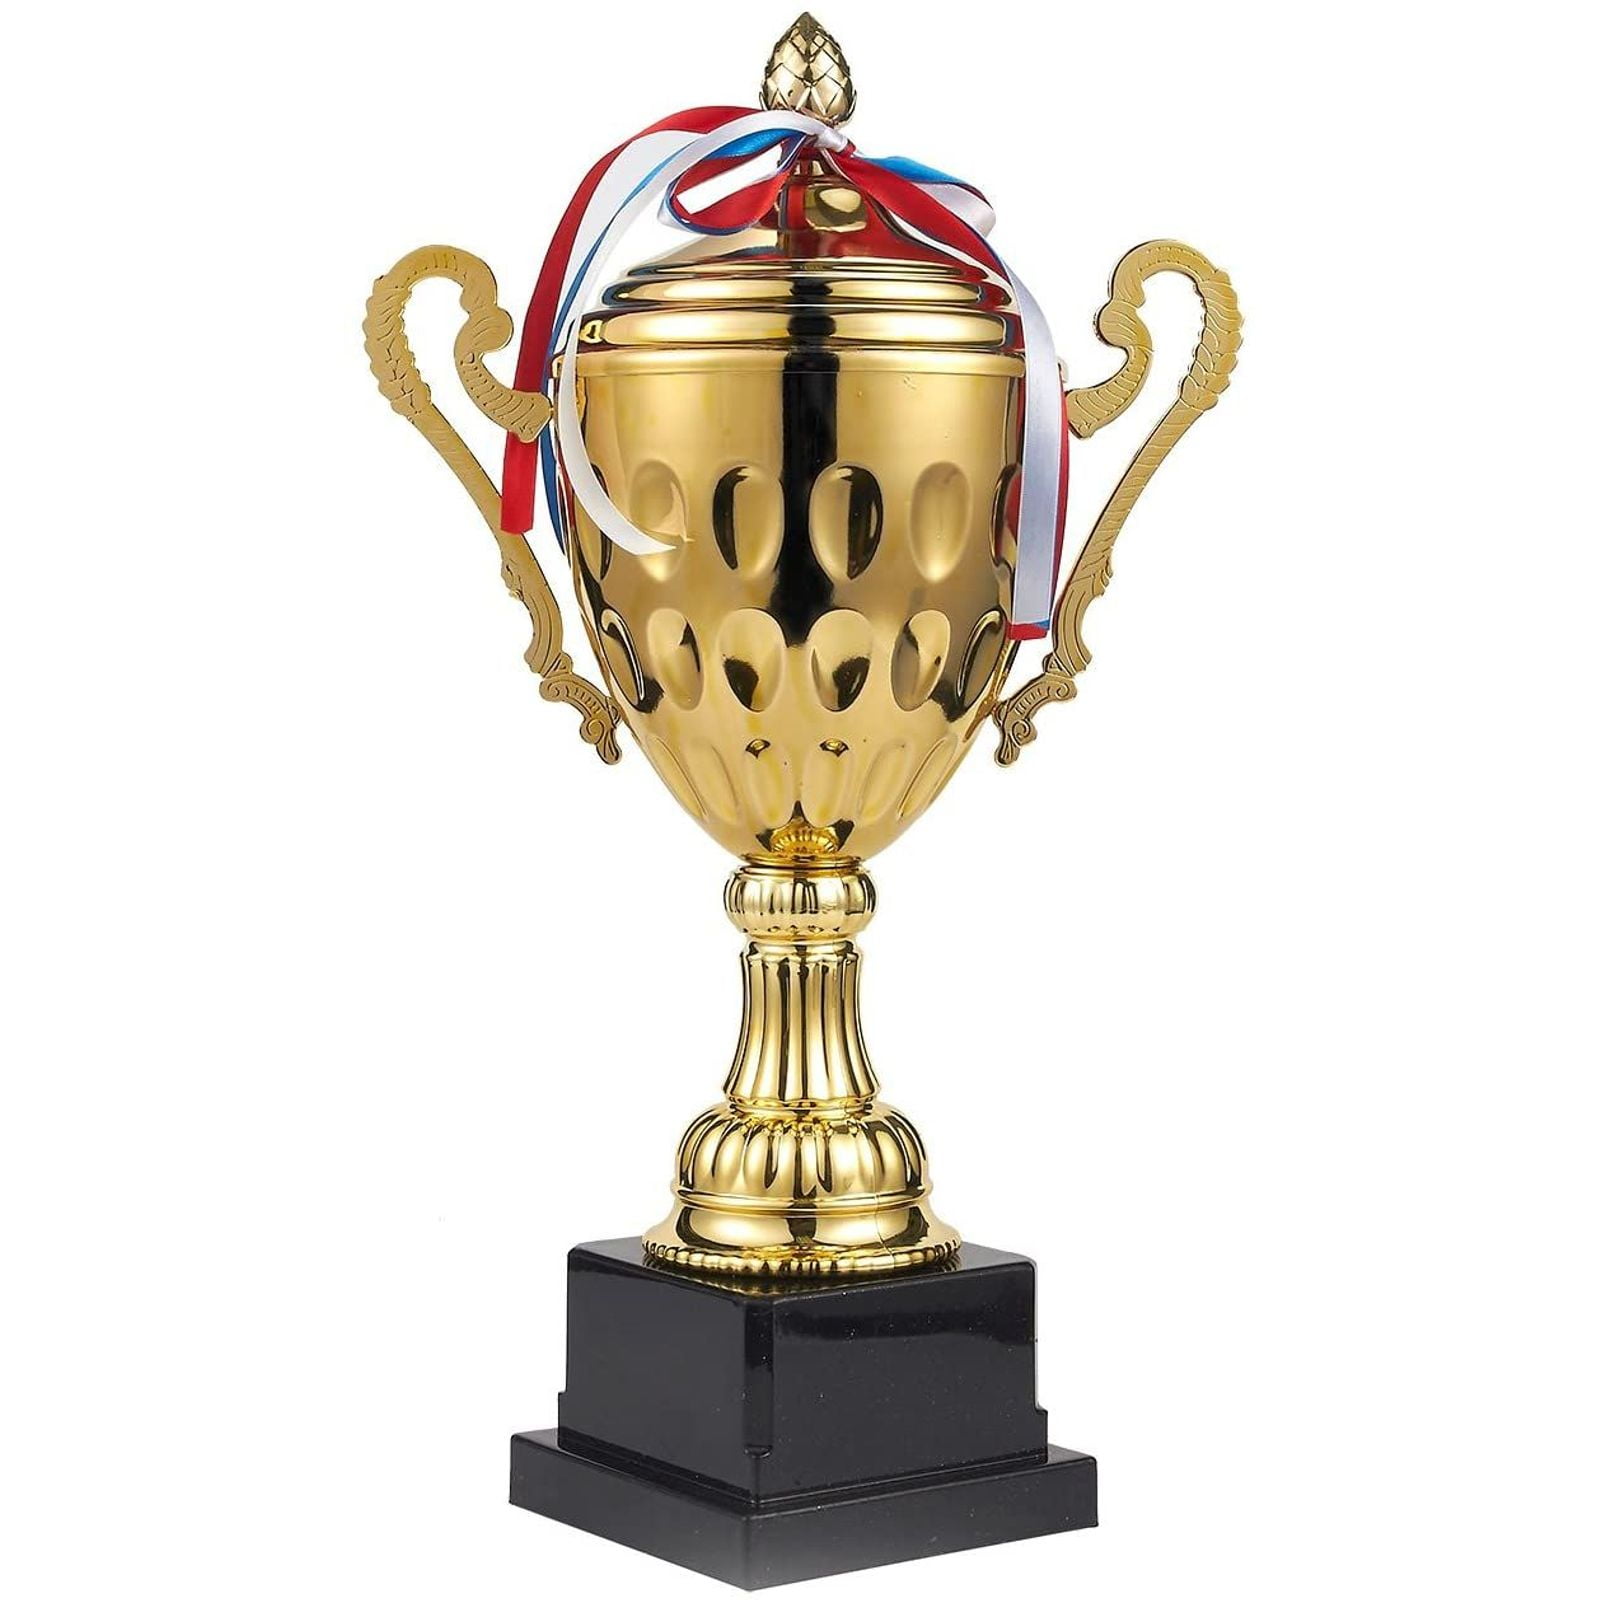 Kisangel Golden Sports Award Trophy Meta Match Tournaments Gold Trophy Cups Competitive Trophy Honor Trophy for Award Ceremony Appreciation Gift 24 5cm